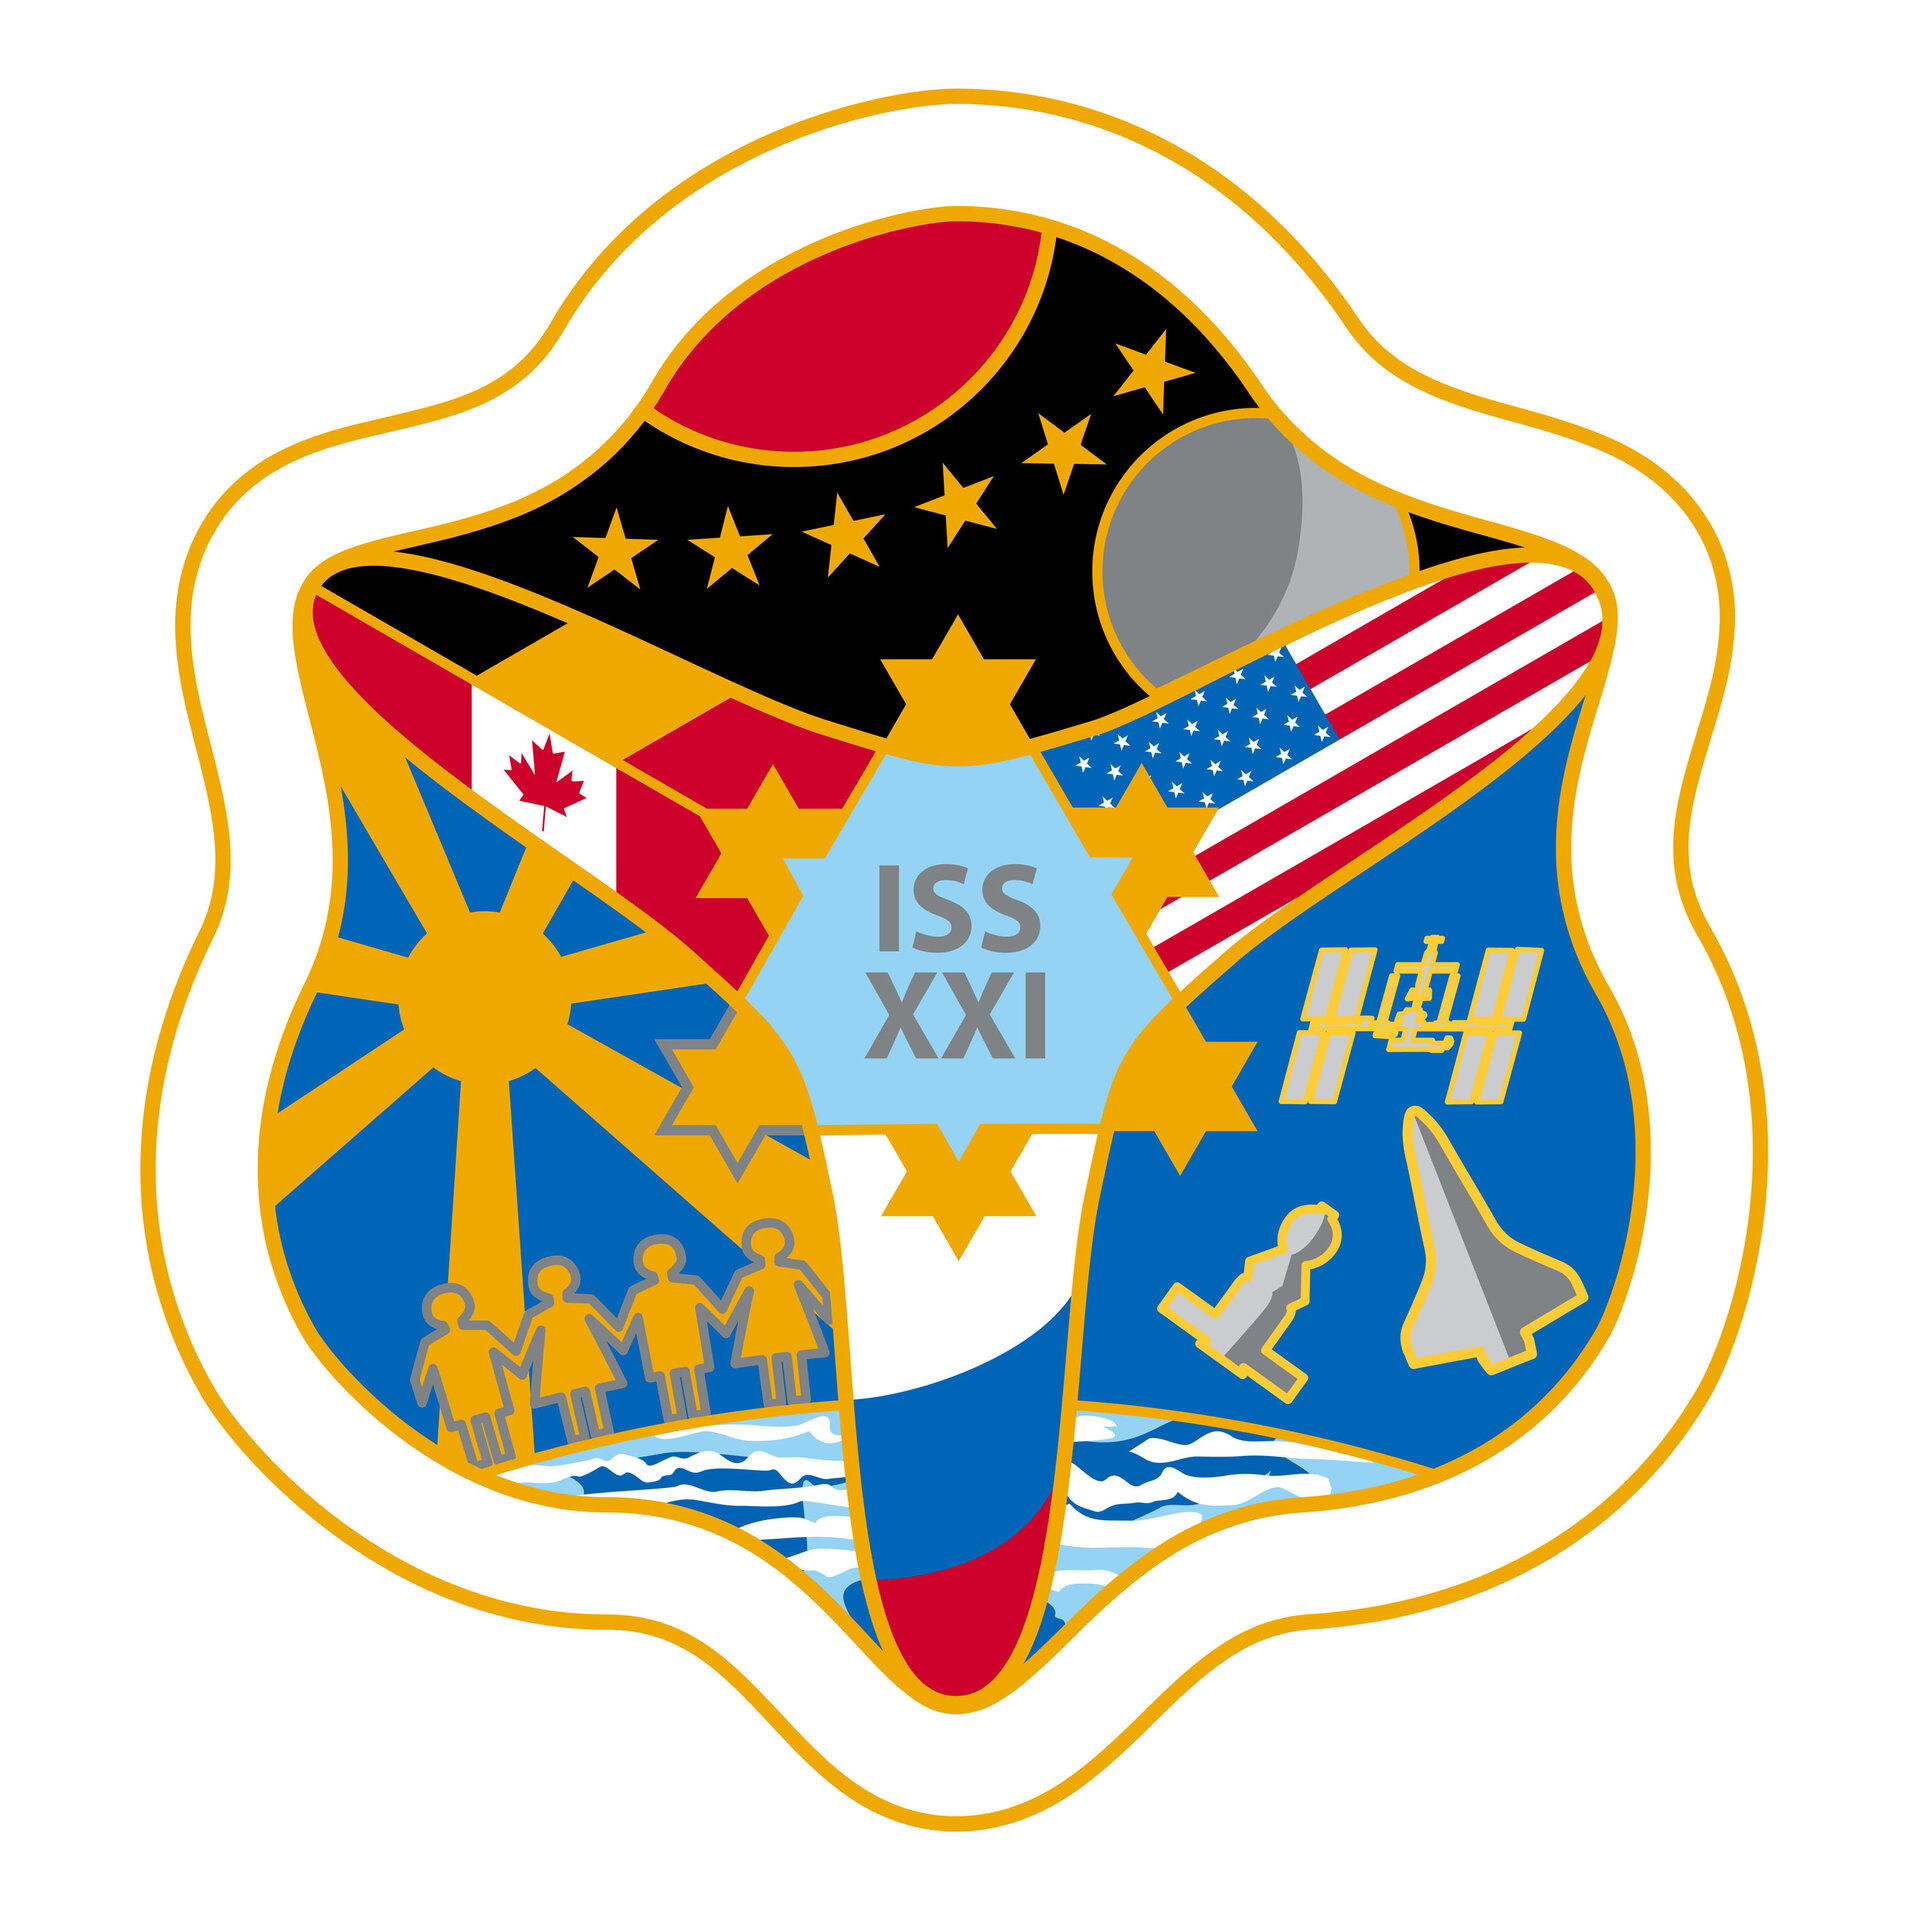 ISS Expedition 21 patch, 2009